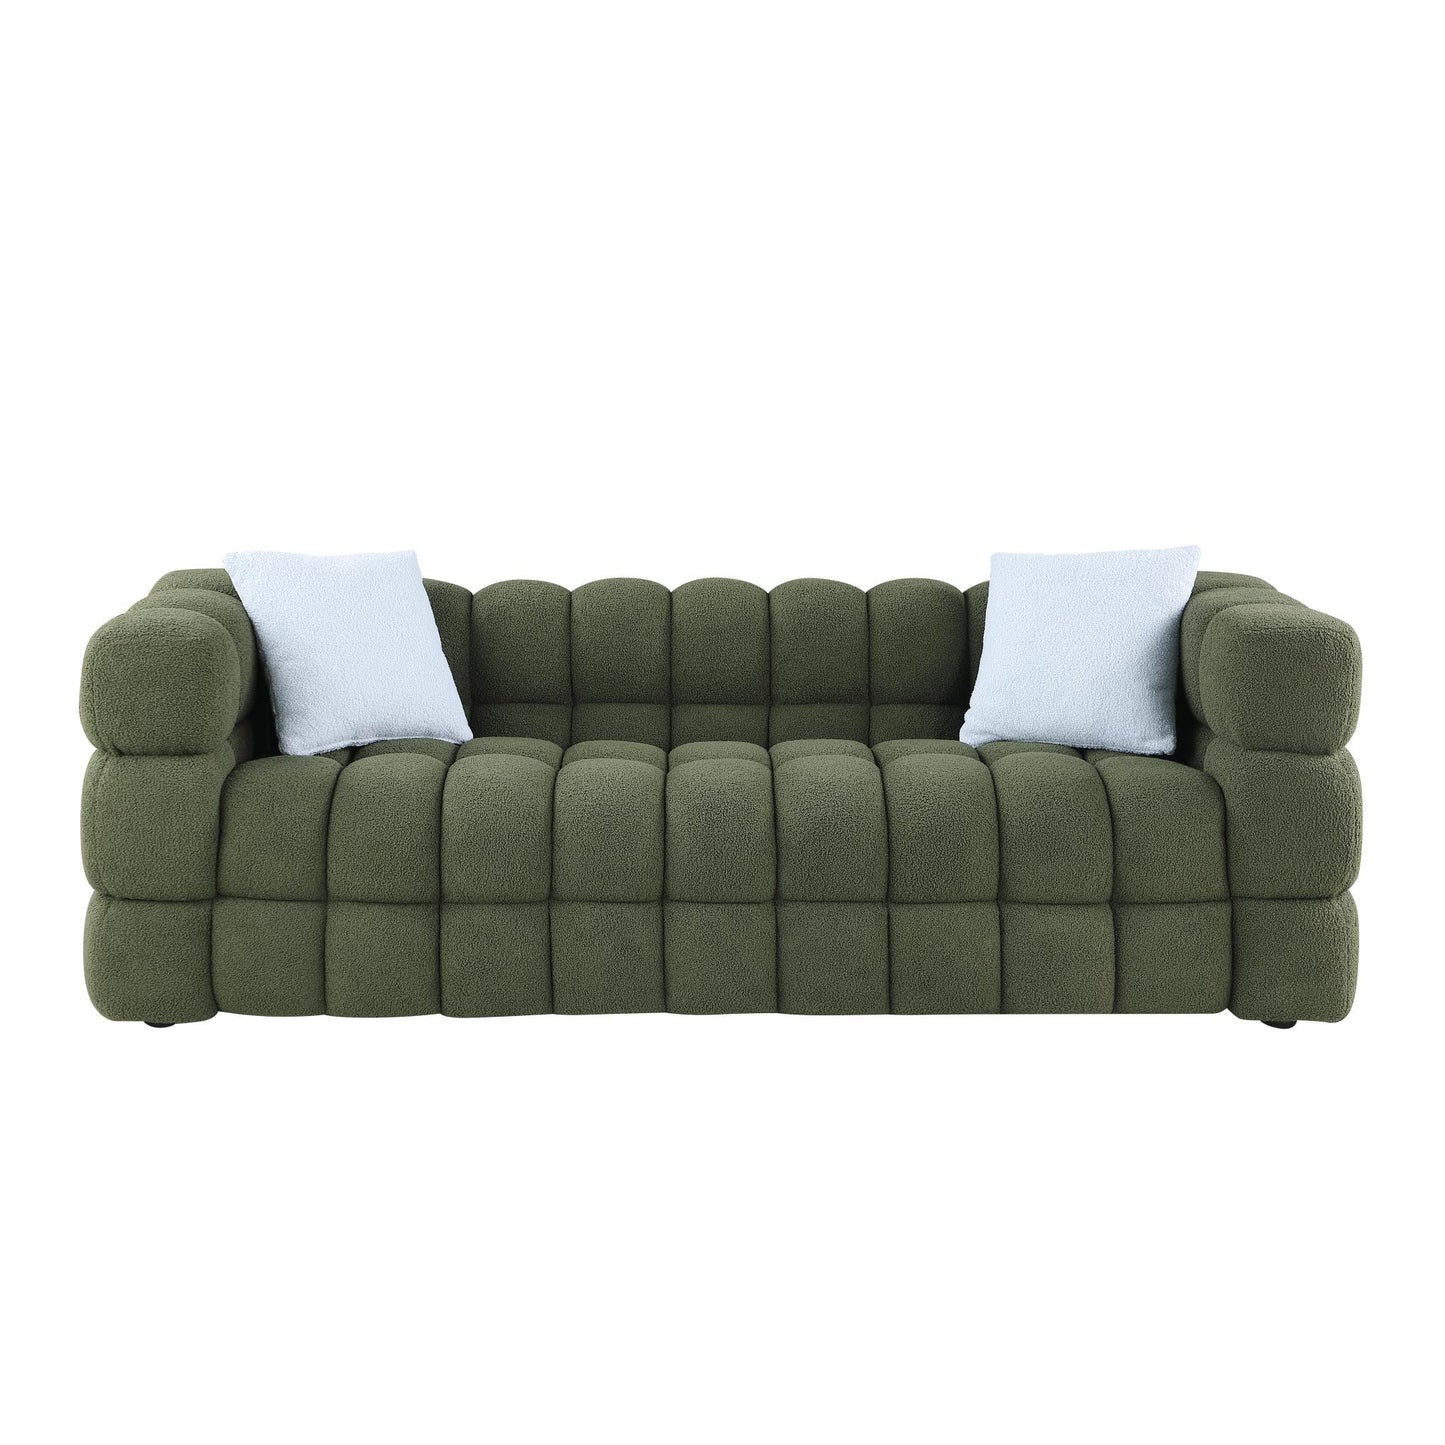 84.3" Marshmallow Boucle Sofa, 3-Seater, USA-Friendly Dimensions